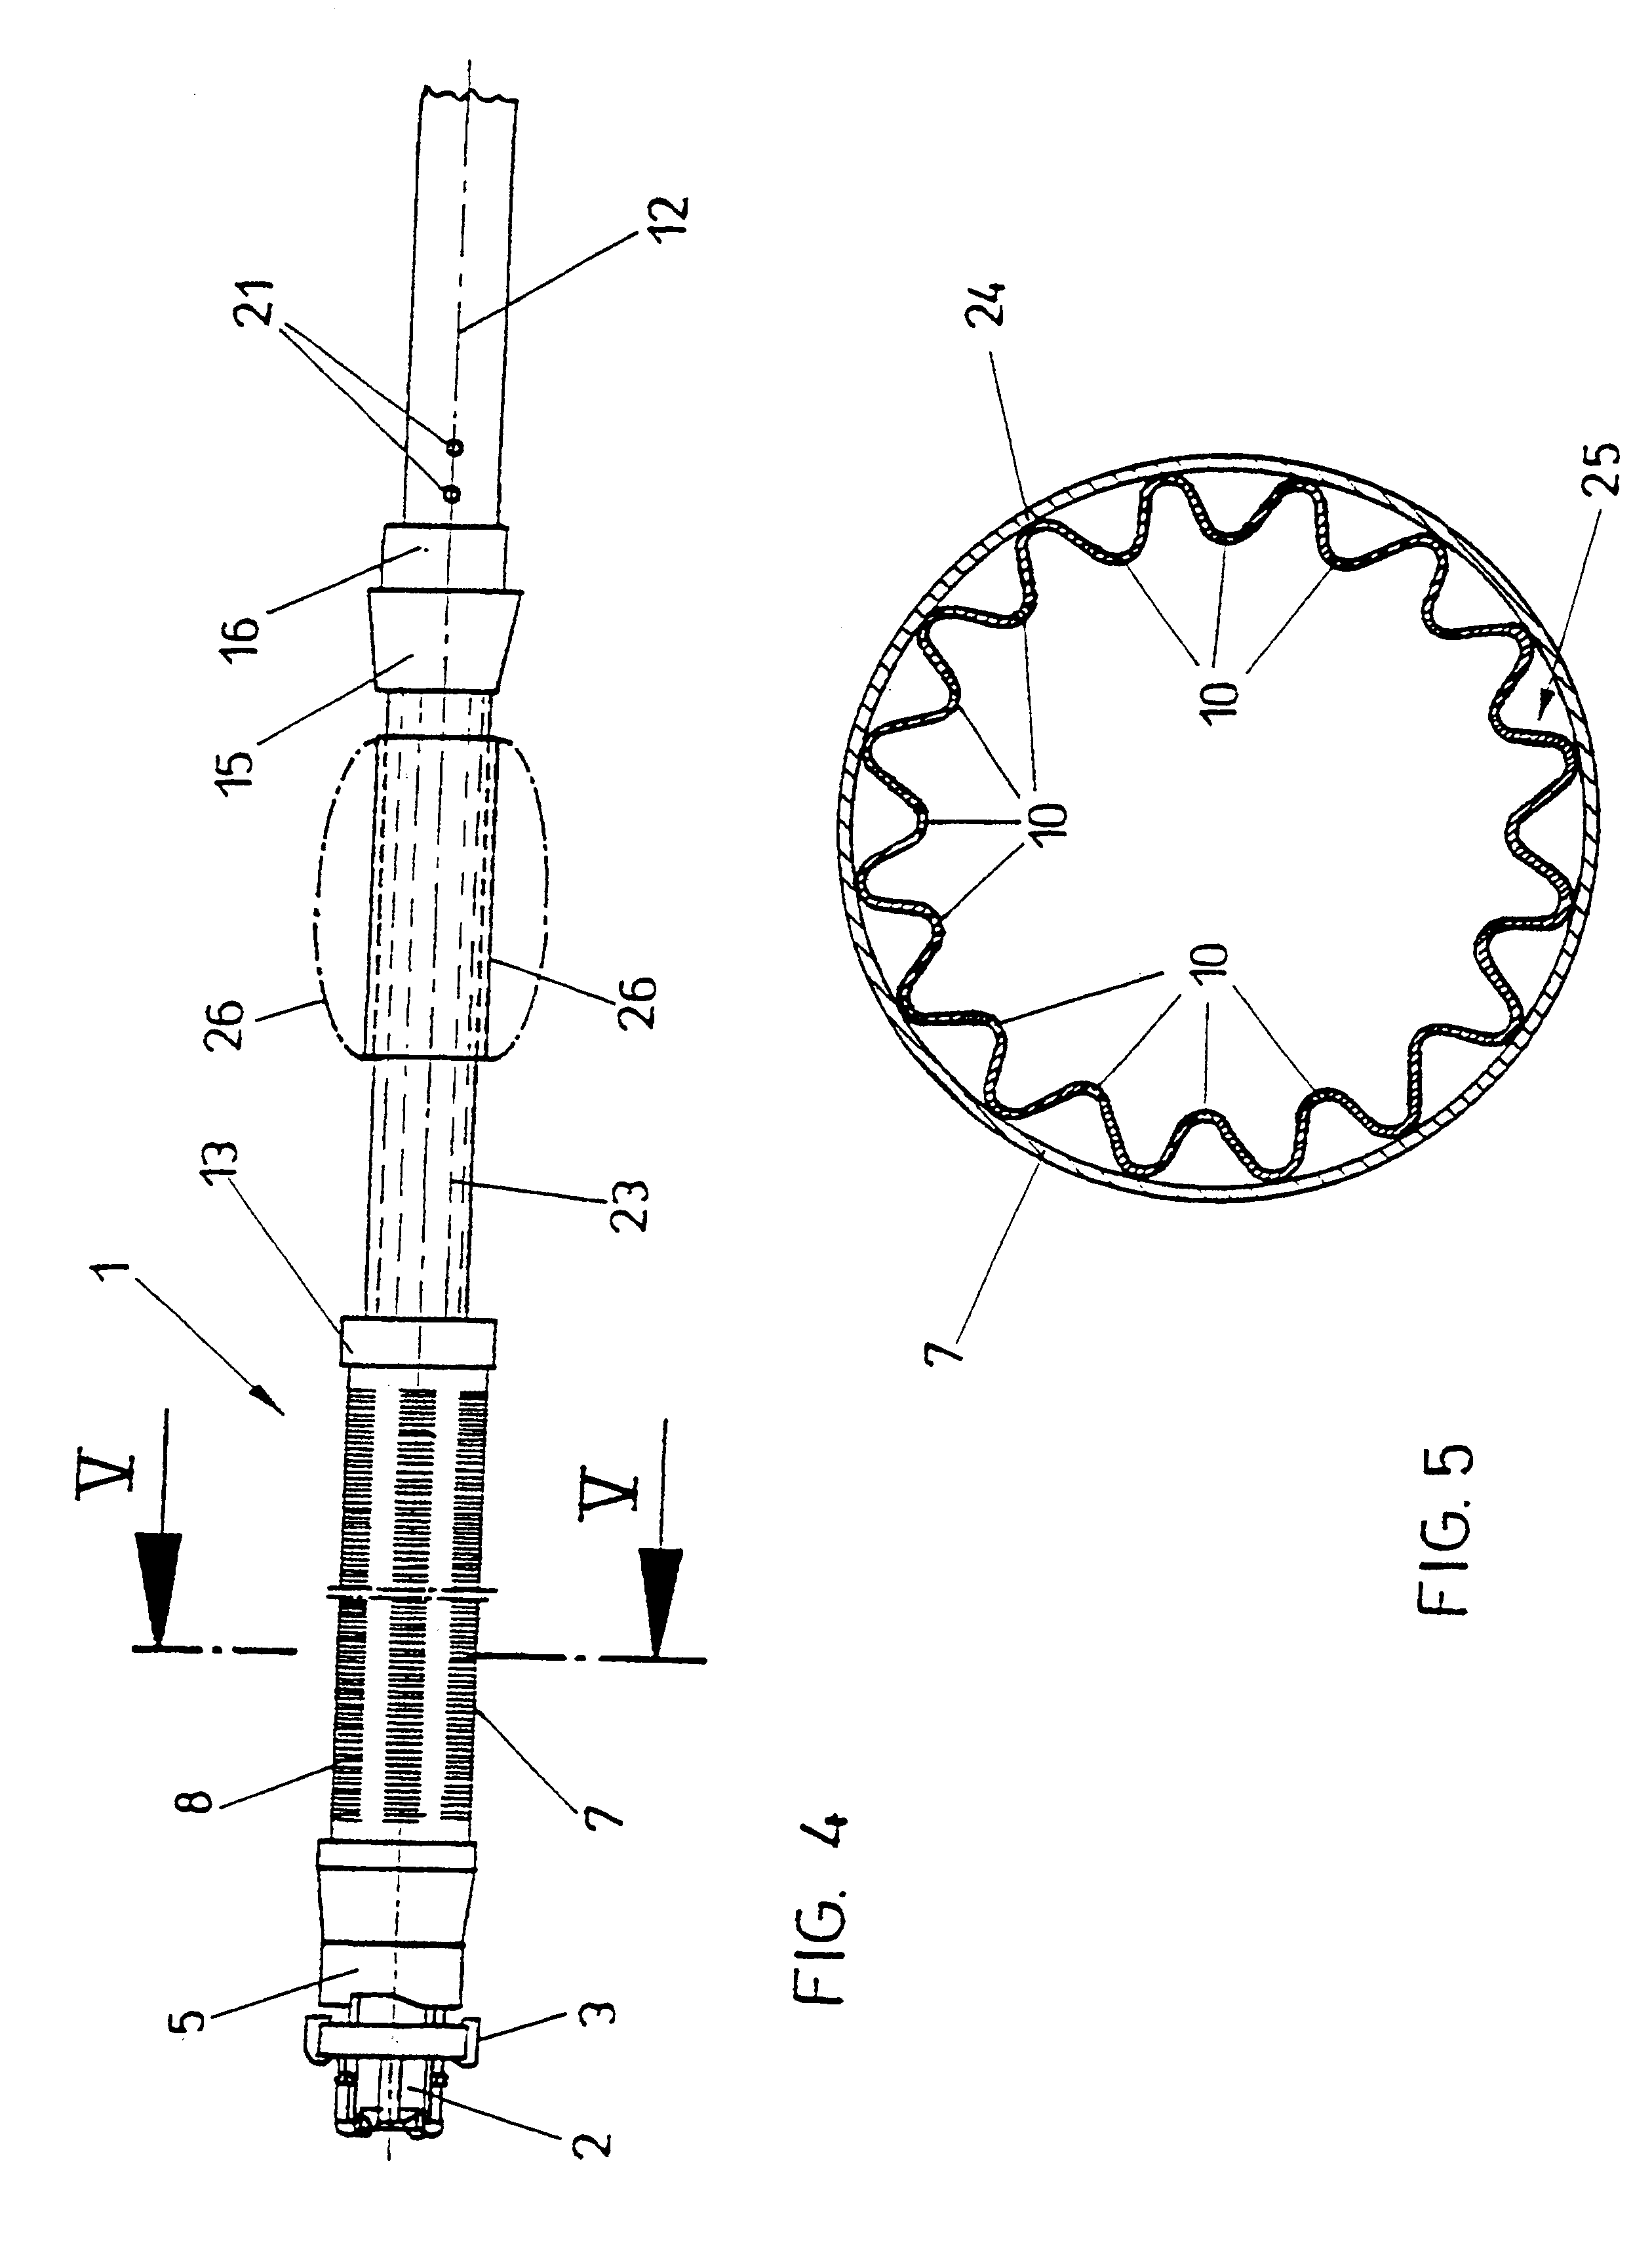 Device for drilling and draining holes in soil or rock